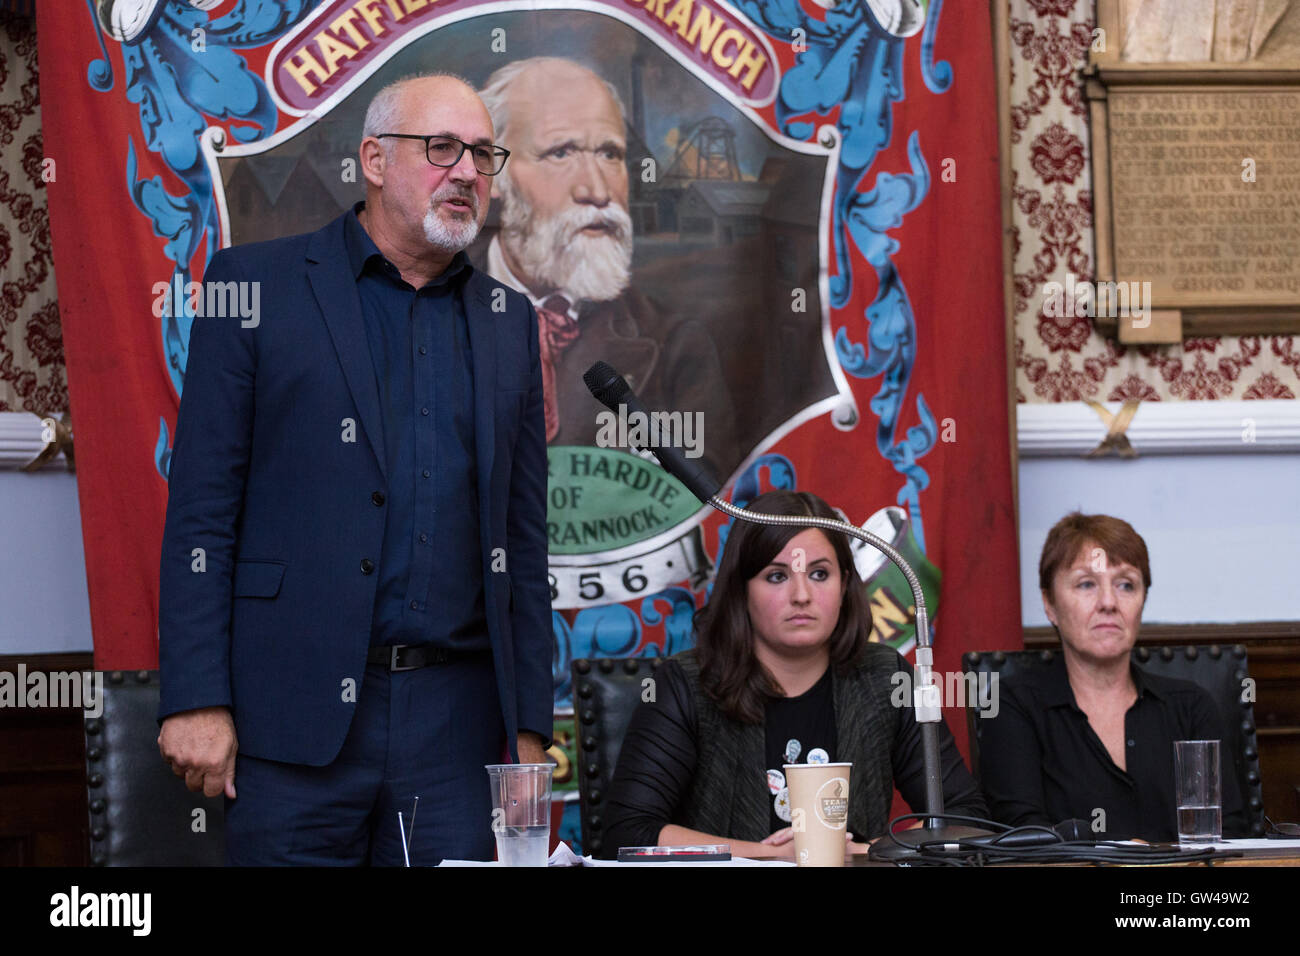 Jon Trickett, Labour politician and MP for Hemsworth, speaks at a rally, held at the National Union of Mineworkers, in Barnsley, Stock Photo